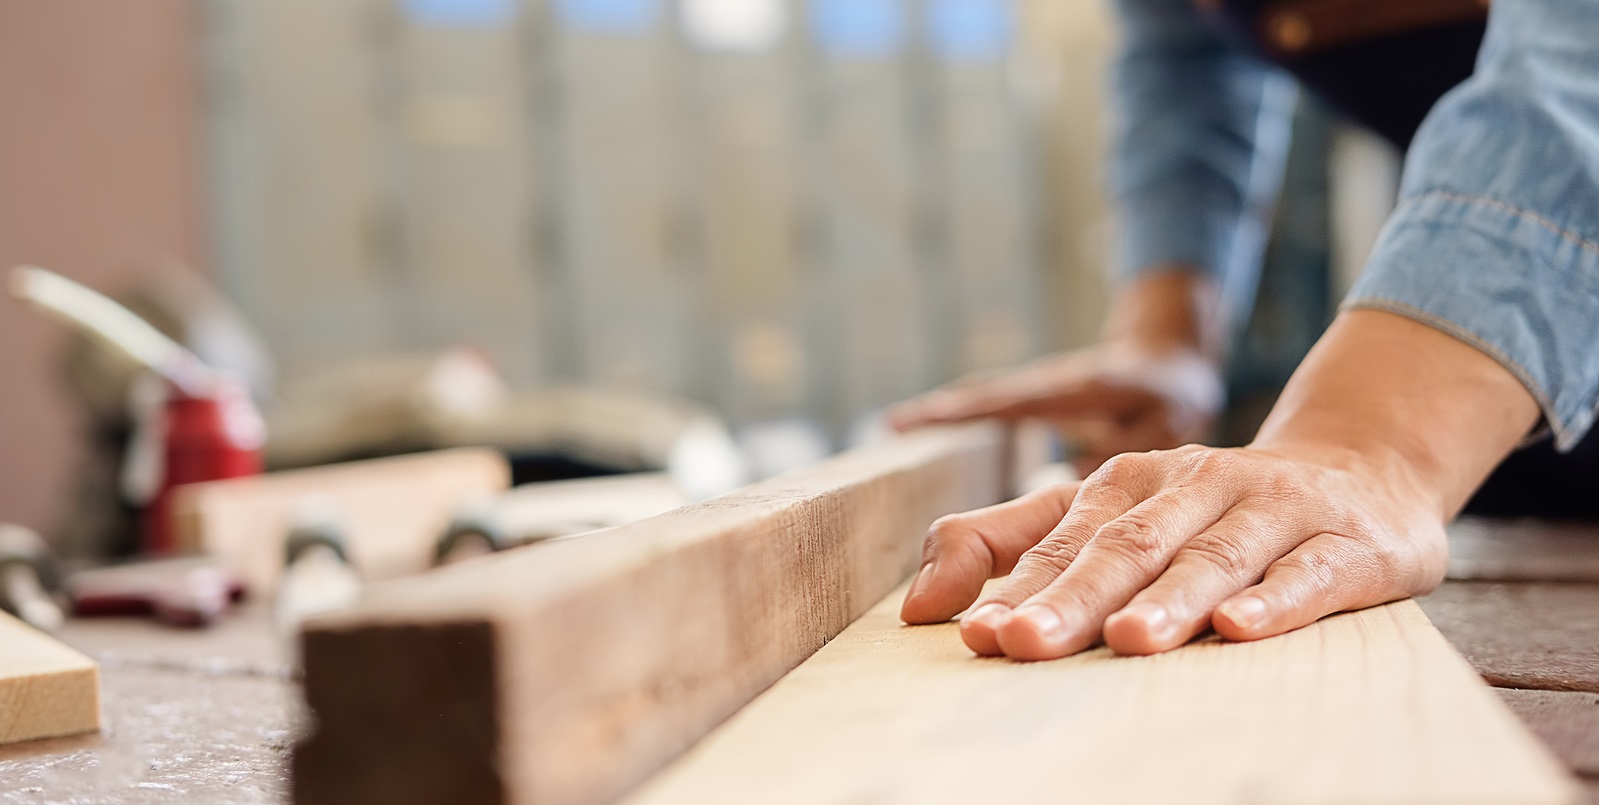 7 Woodworking Mistakes To Avoid For Successful DIY Projects